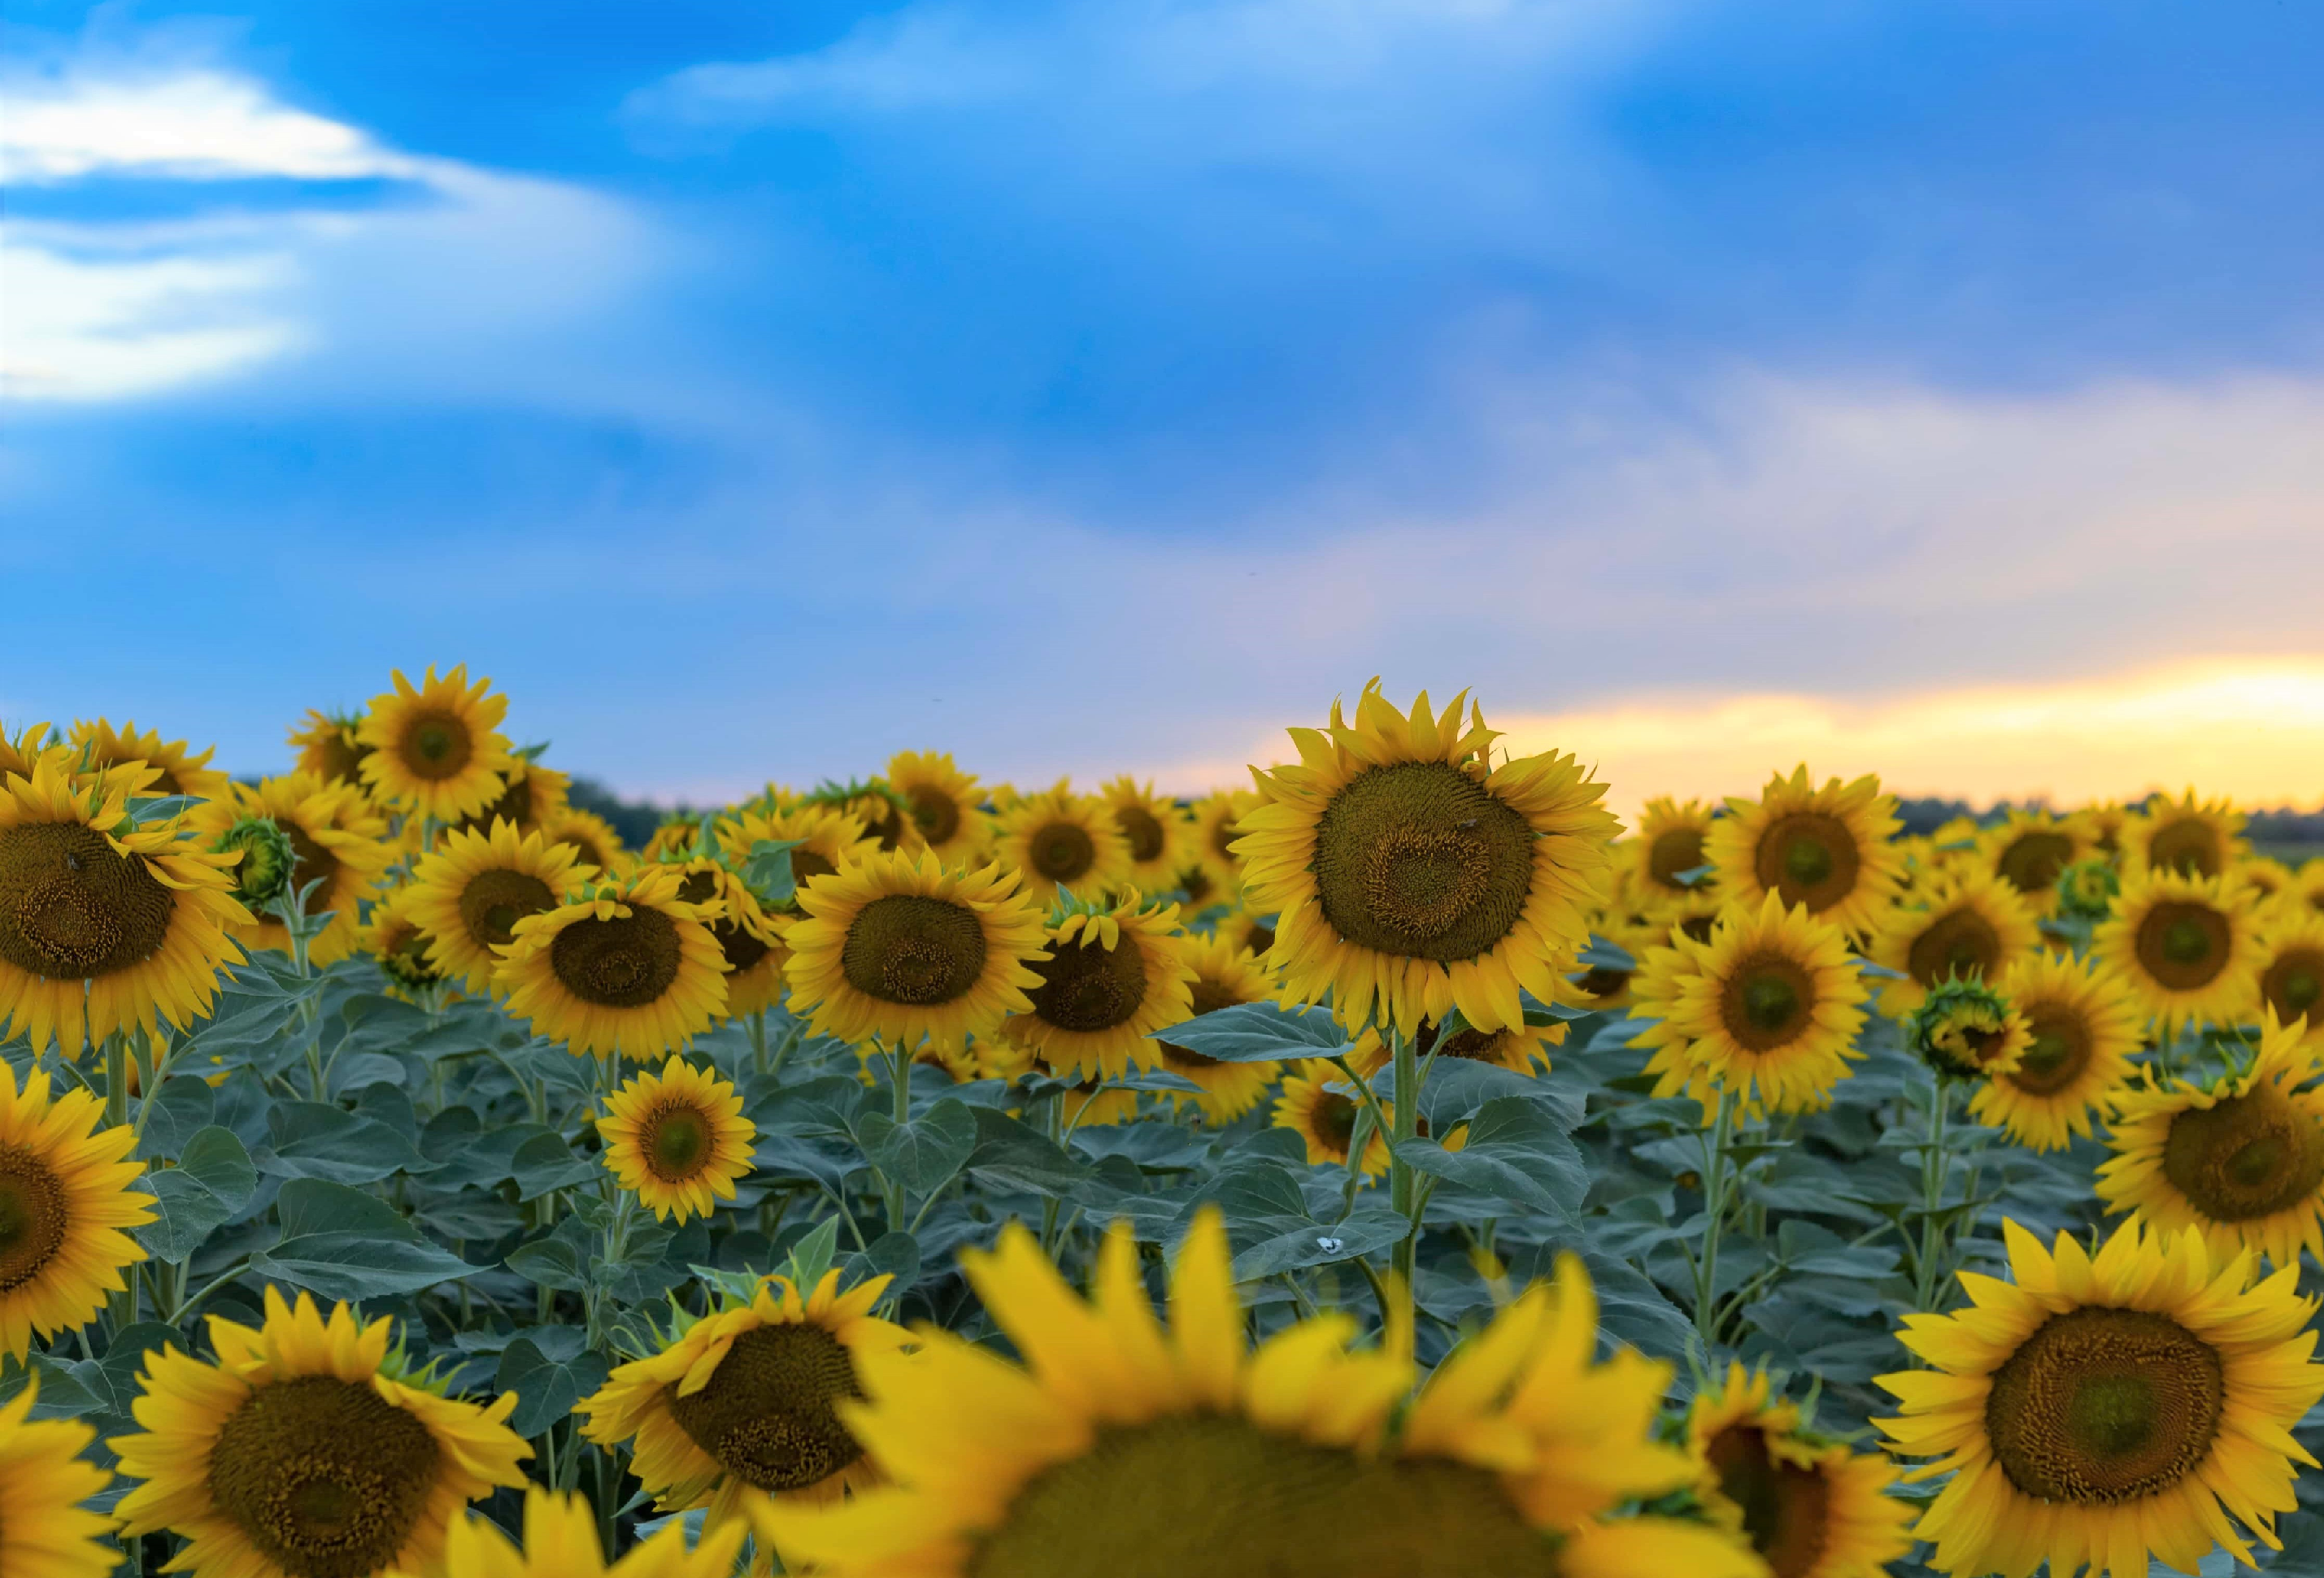 Field of sunflowers with a blue sky background